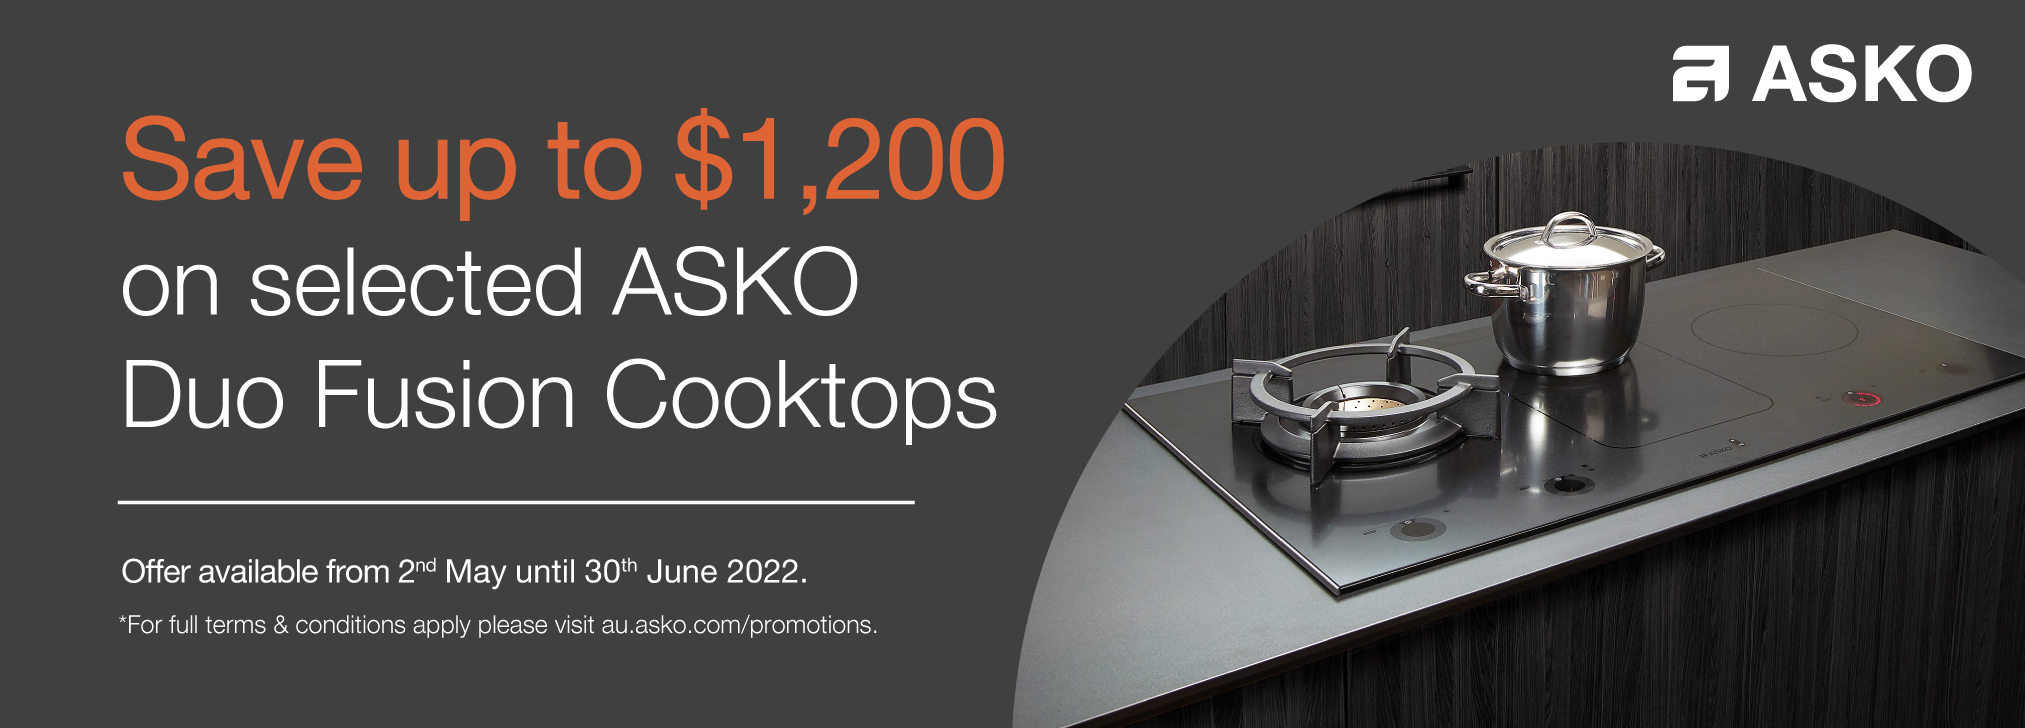 Save up to $1200 on selected Asko Duo Fusion Cooktops